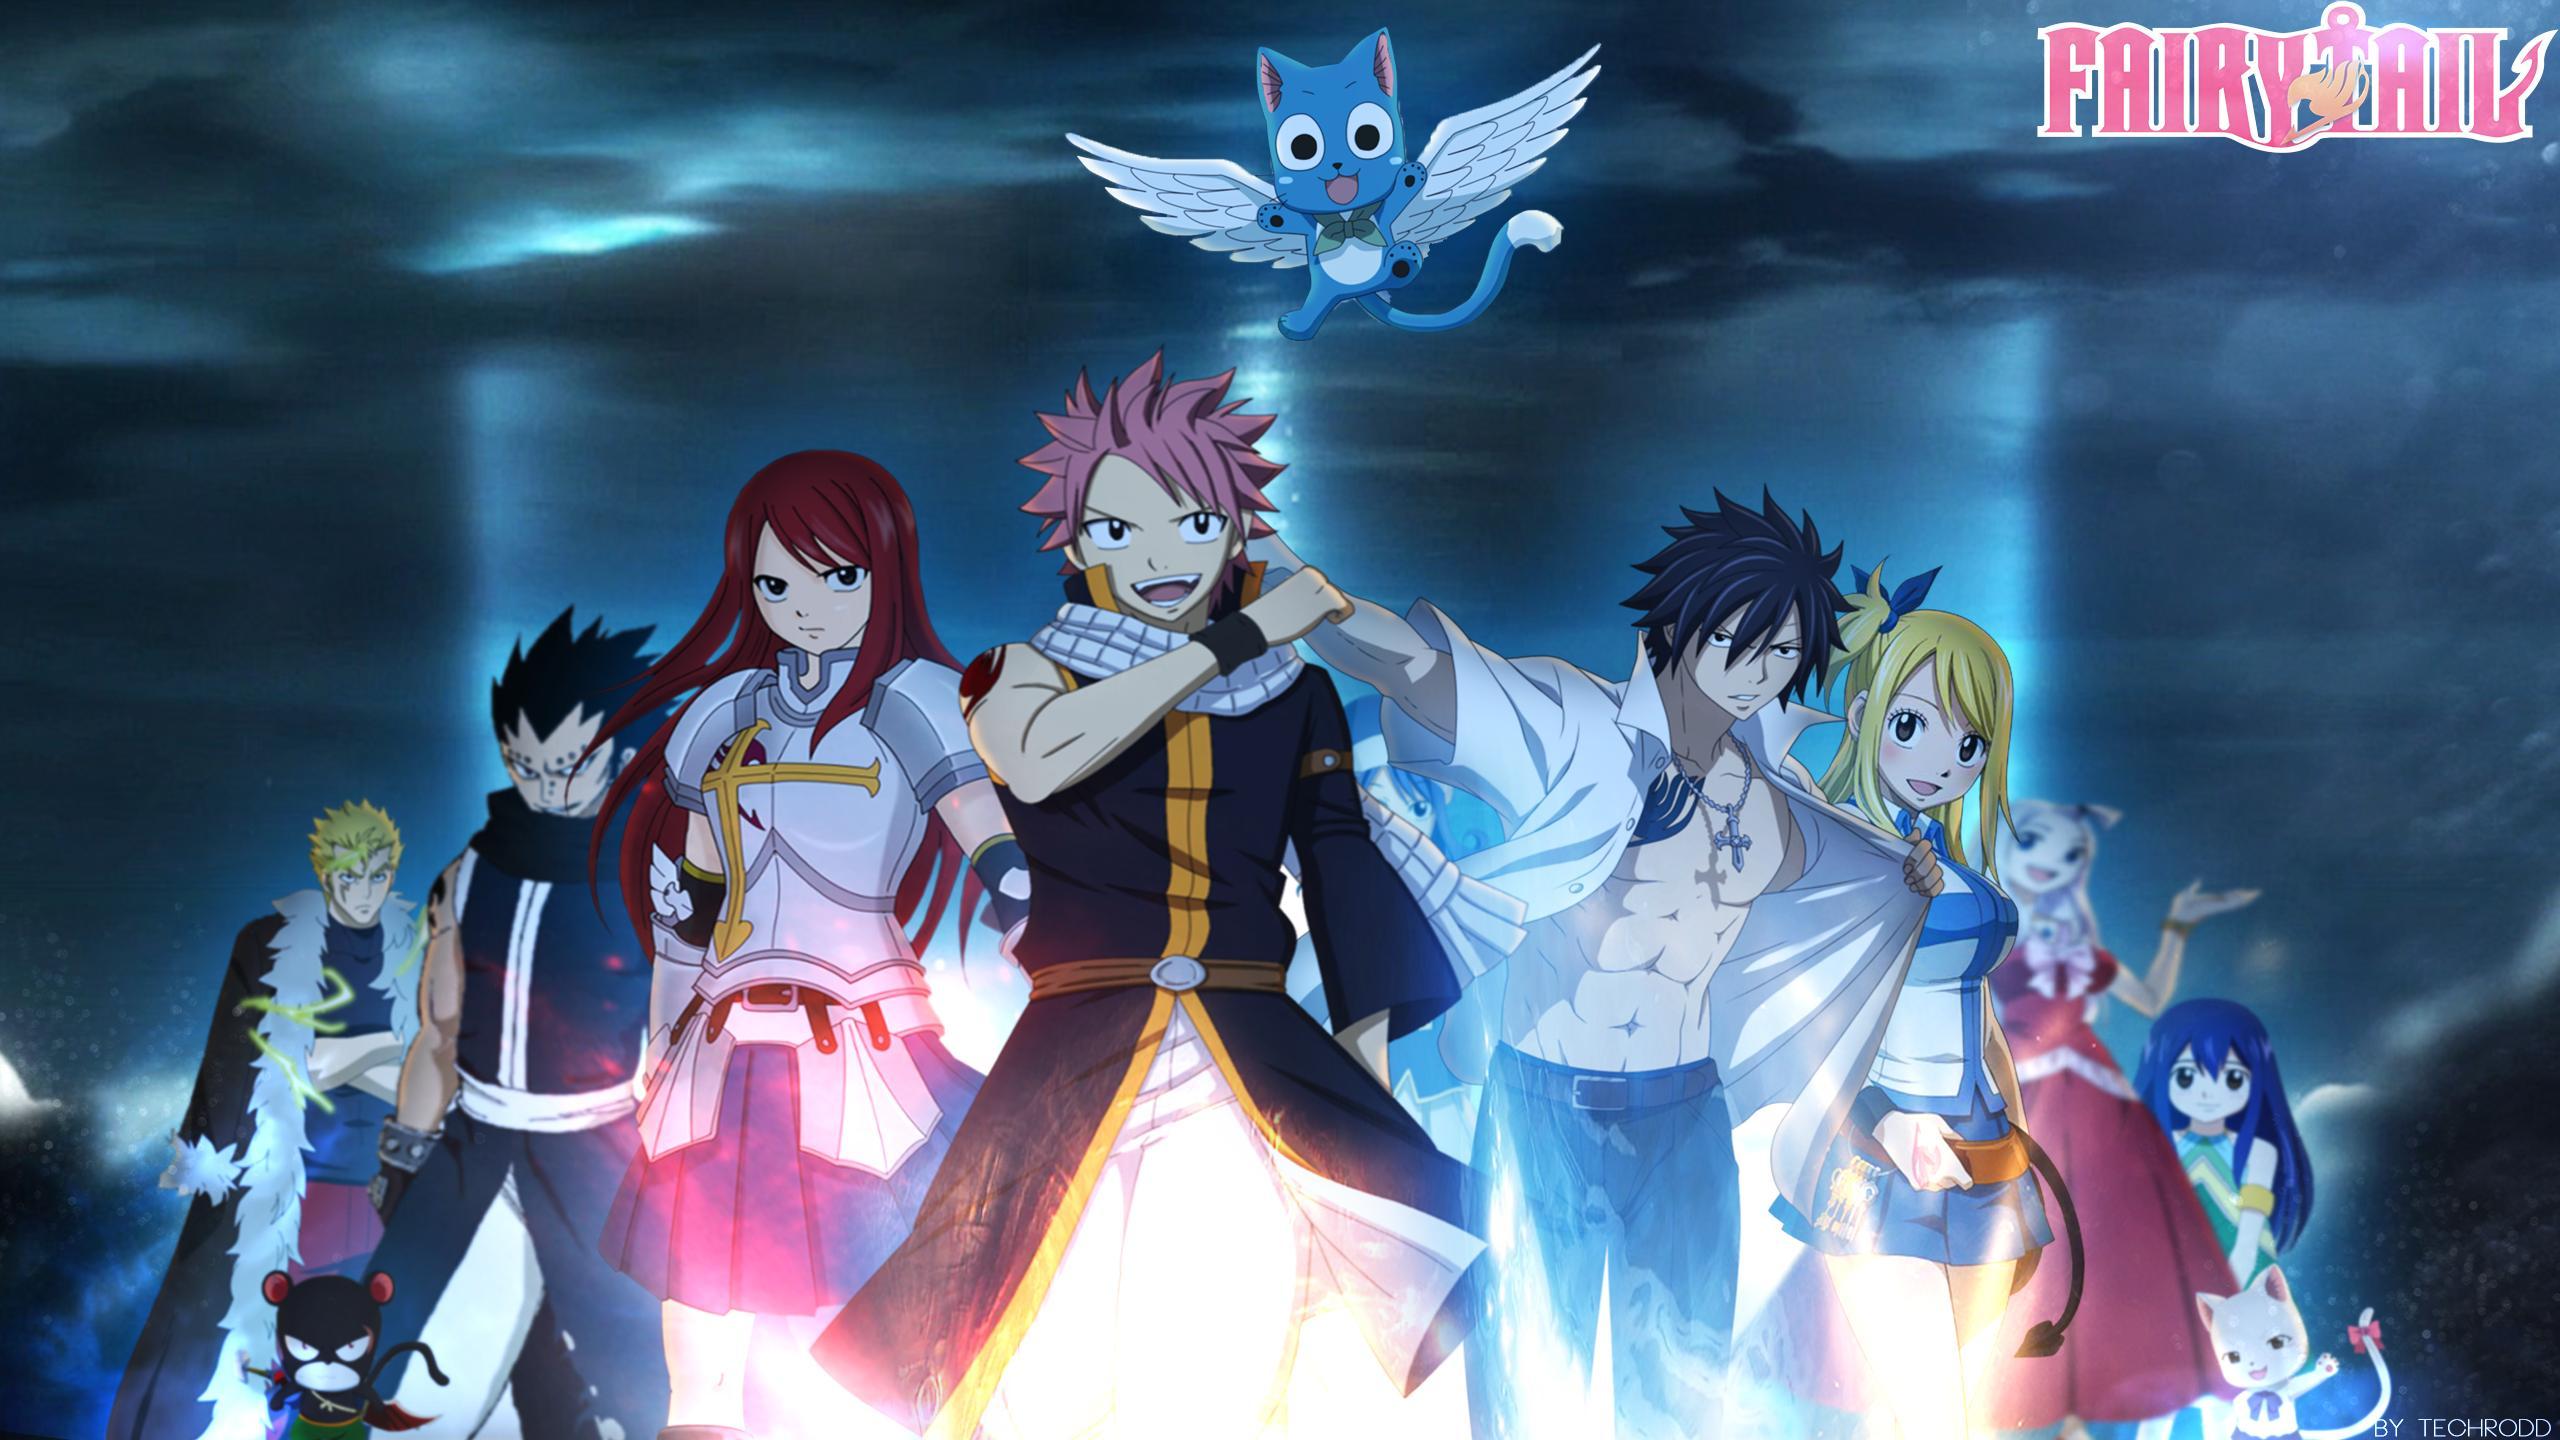 Collection of Fairy Tail Wallpaper on HDWallpaper 2560x1440